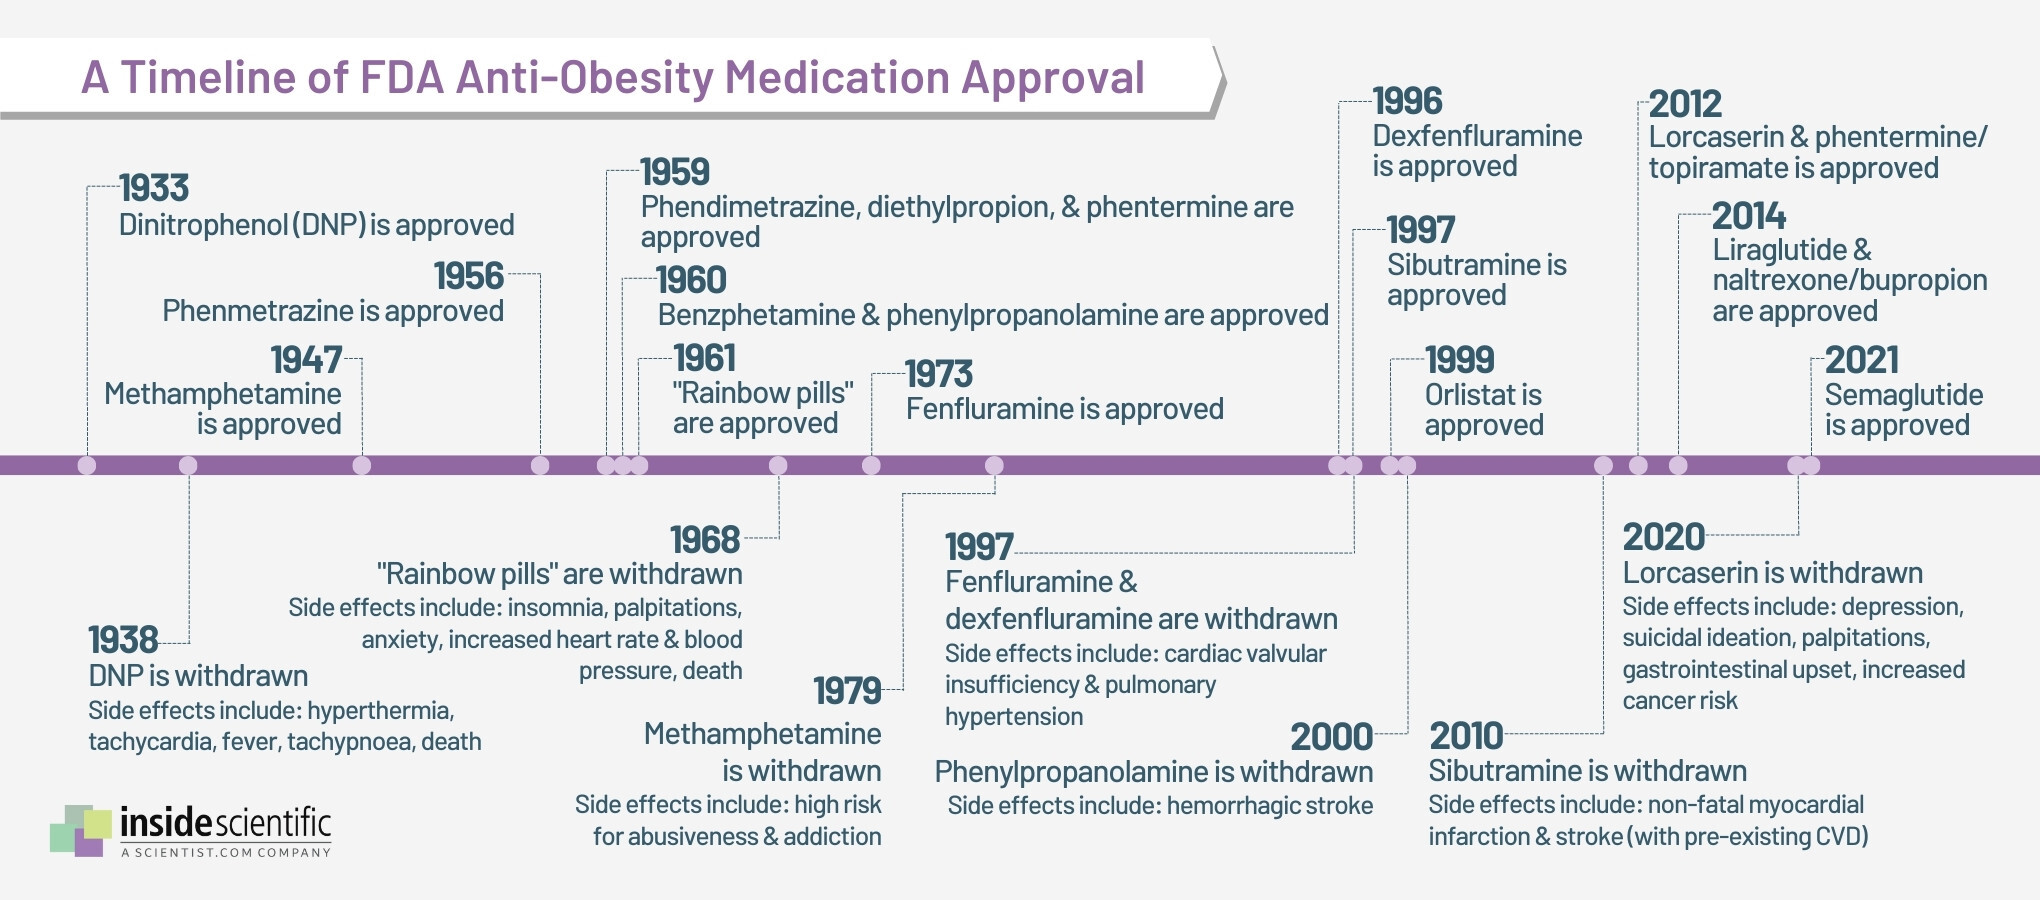 Timeline of Anti-Obesity Medication Approval in the US